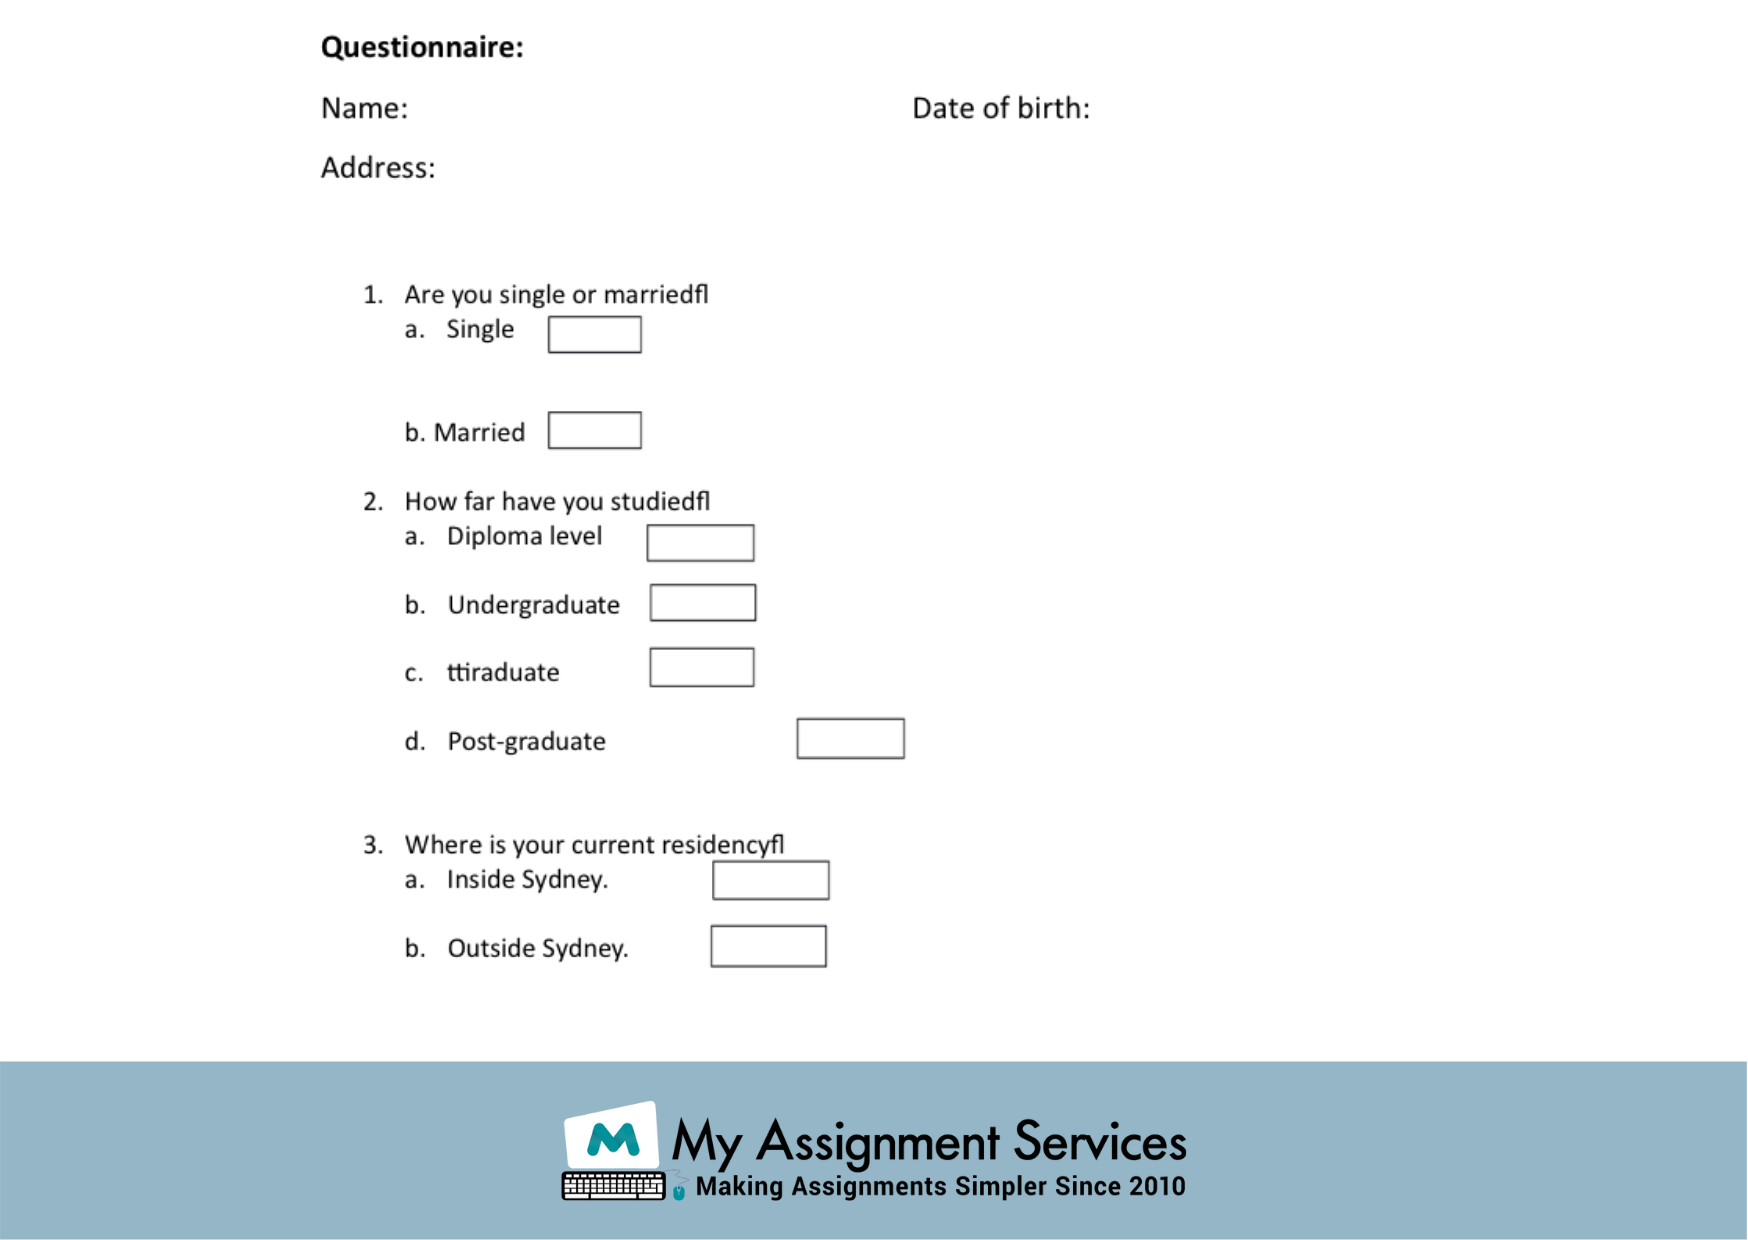 sample of research and questionnaire at my assignment services